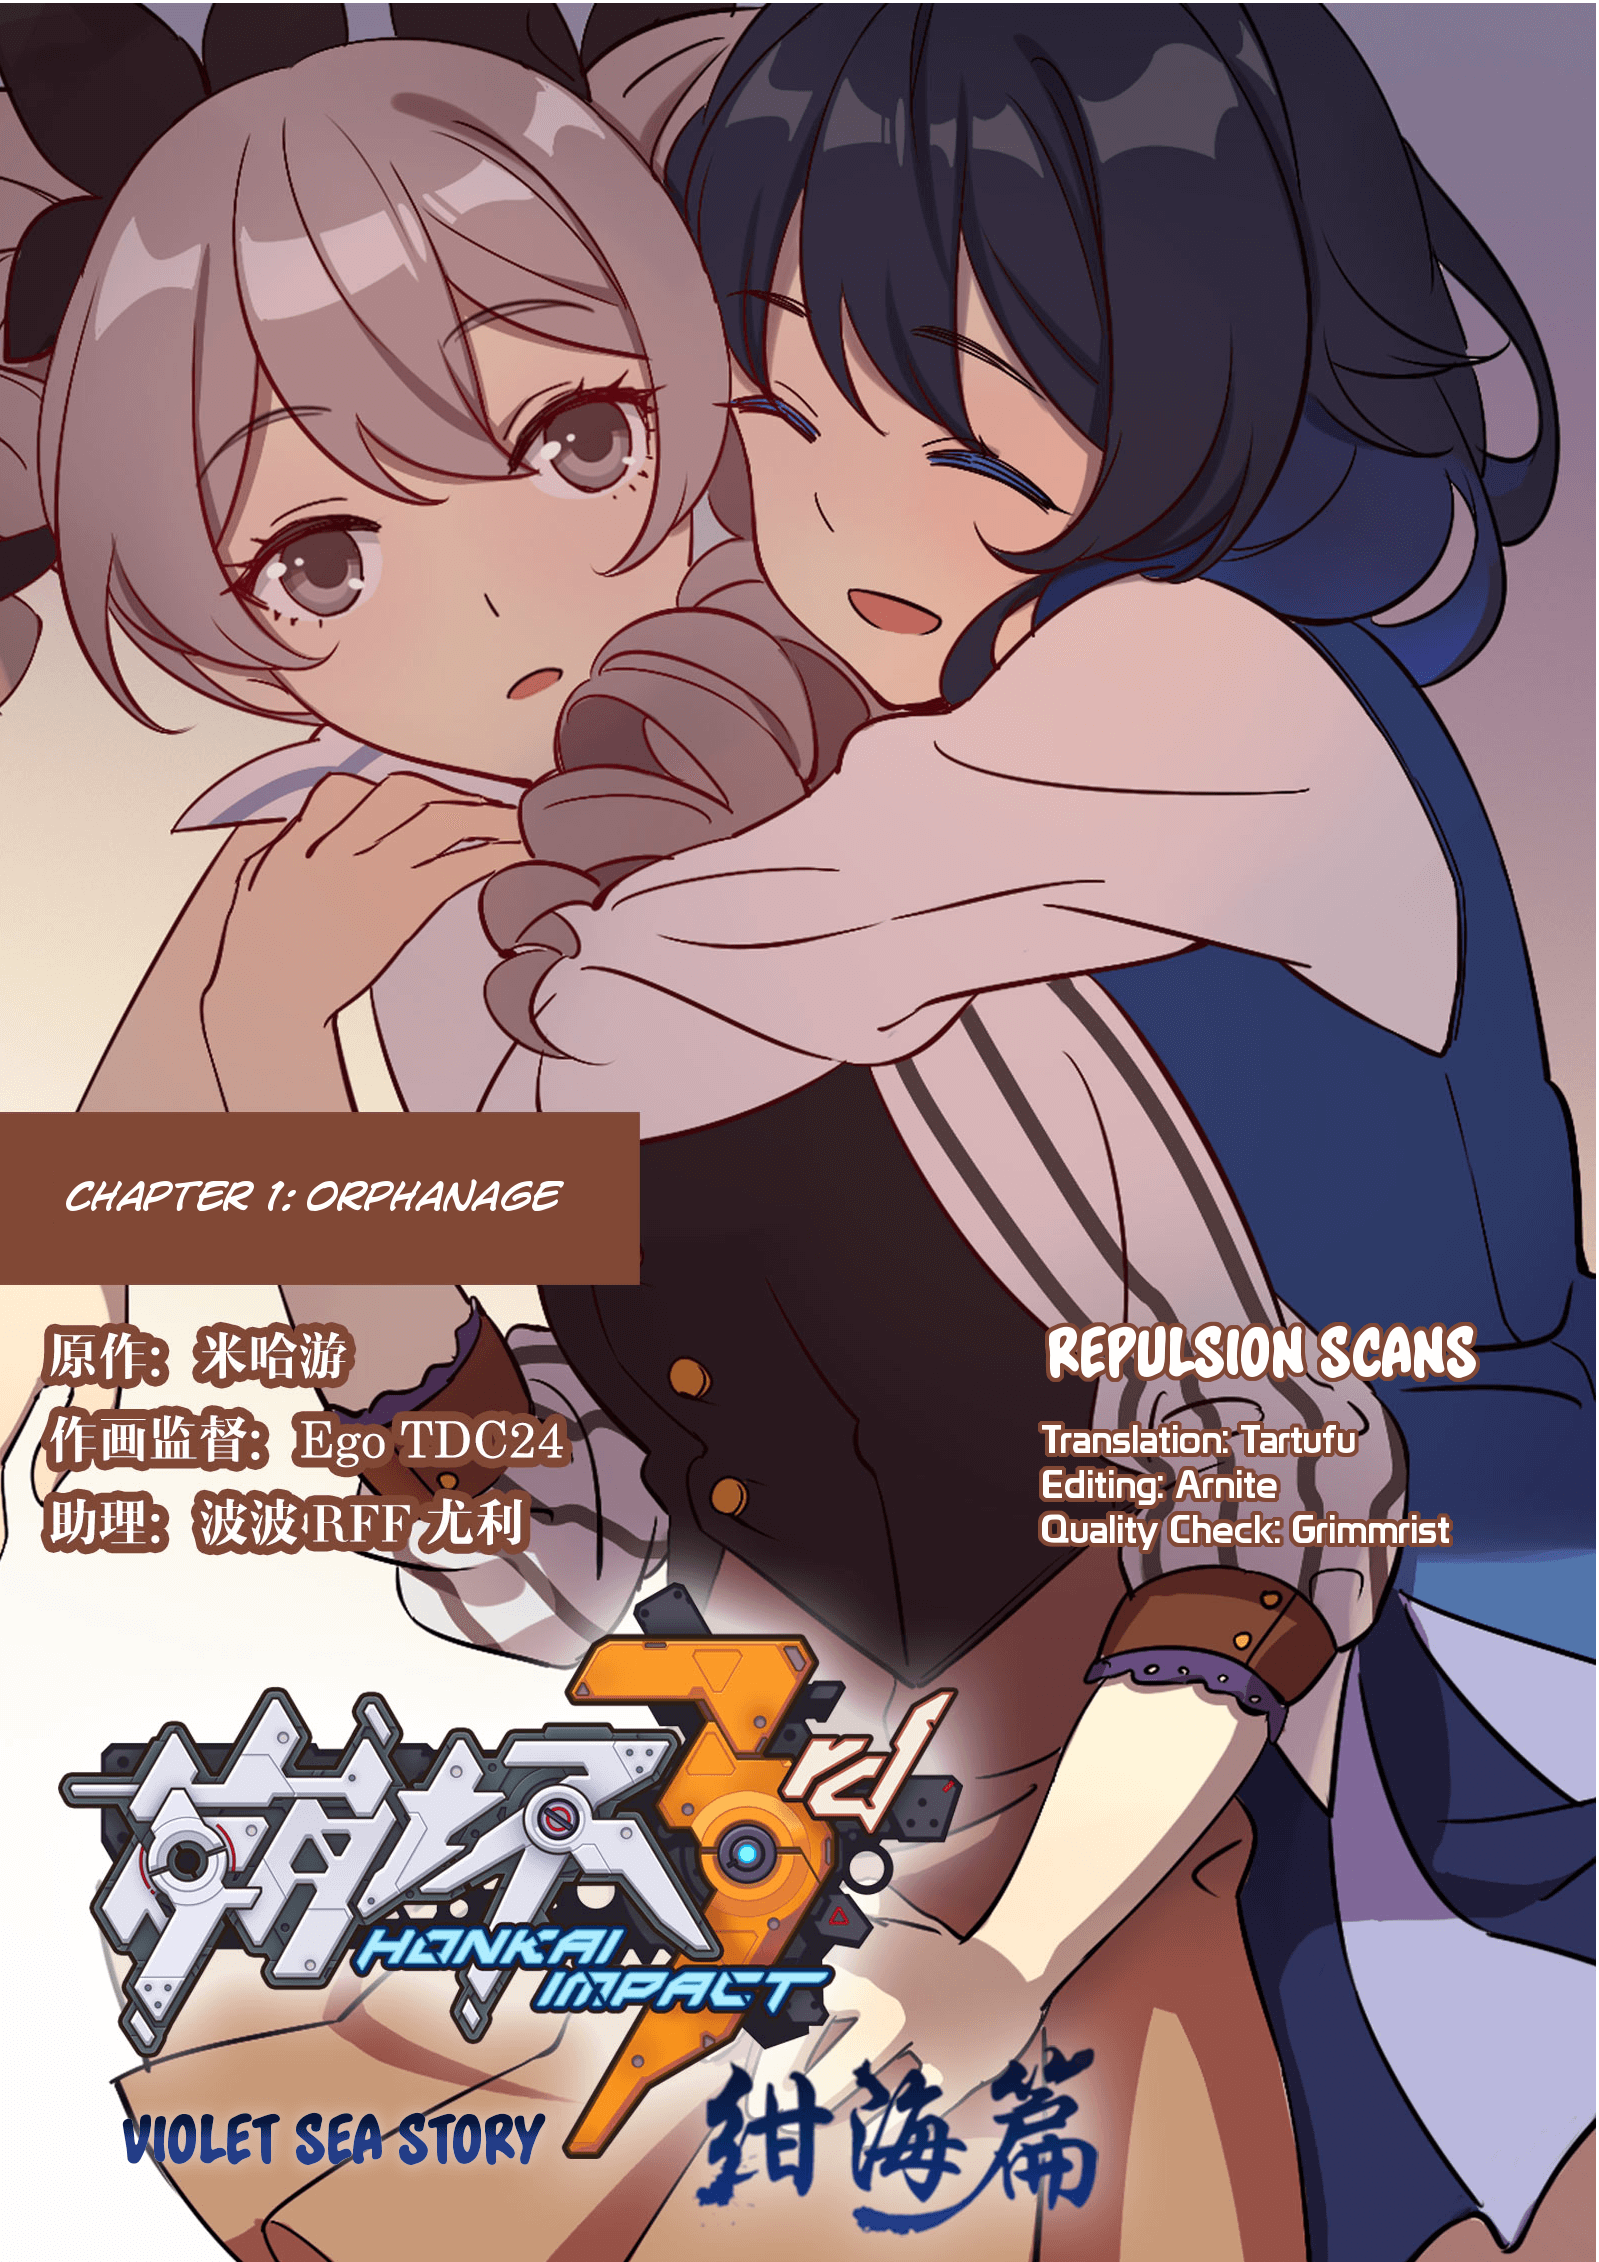 Honkai Impact 3rd - Violet Sea Story chapter 1 - page 1